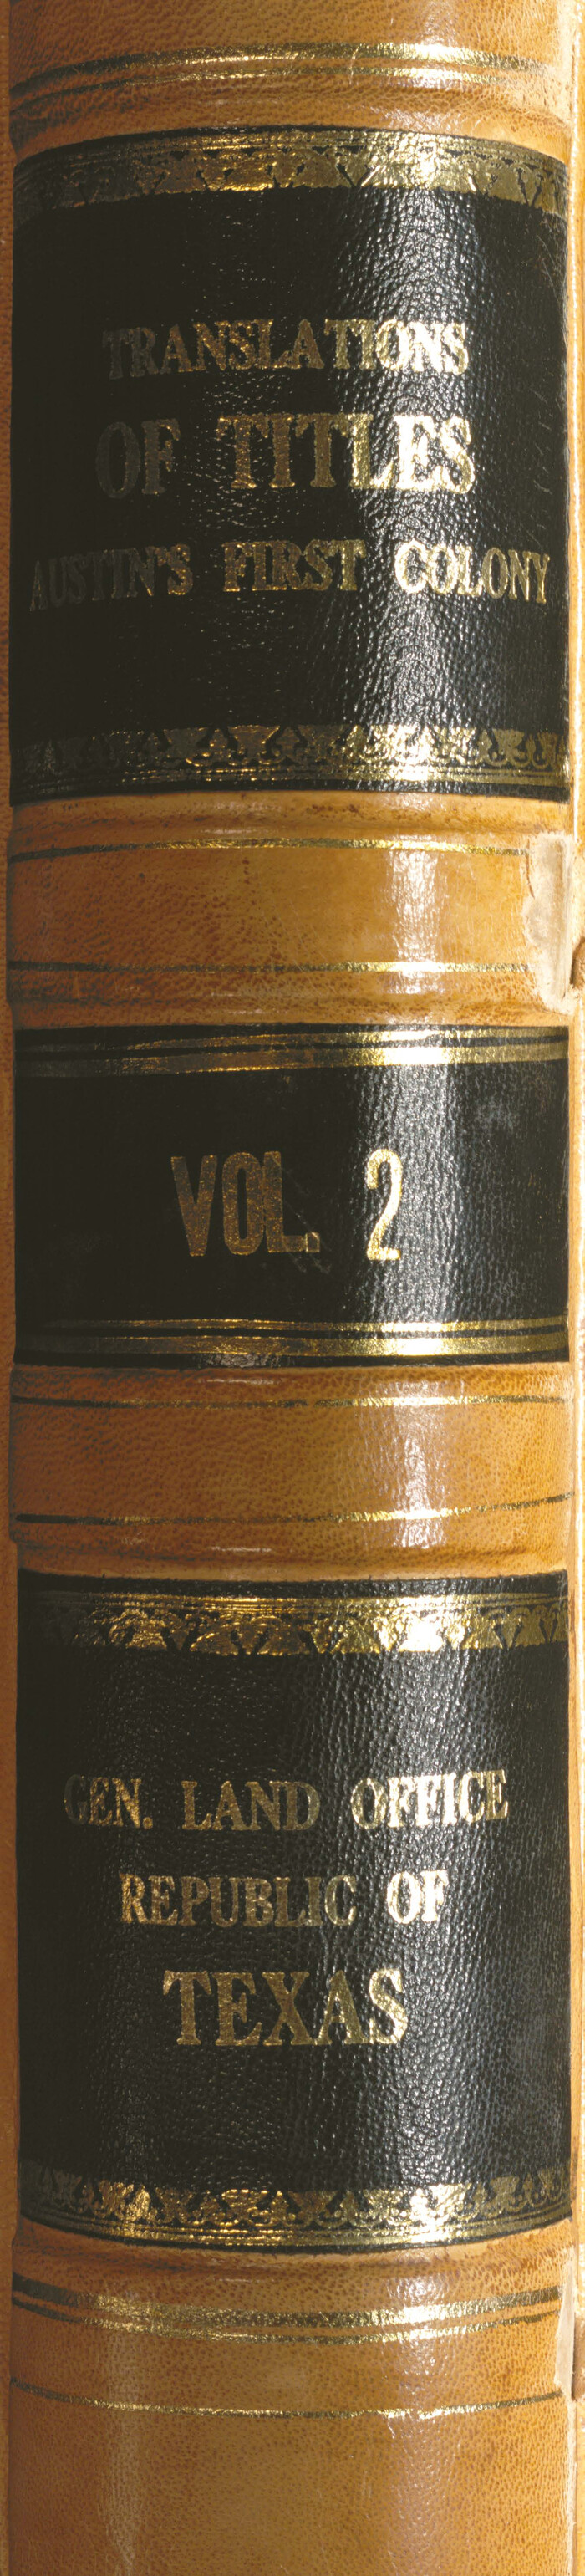 94545, Translation of Titles - Austin's First Colony, Vol. 2, Historical Volumes